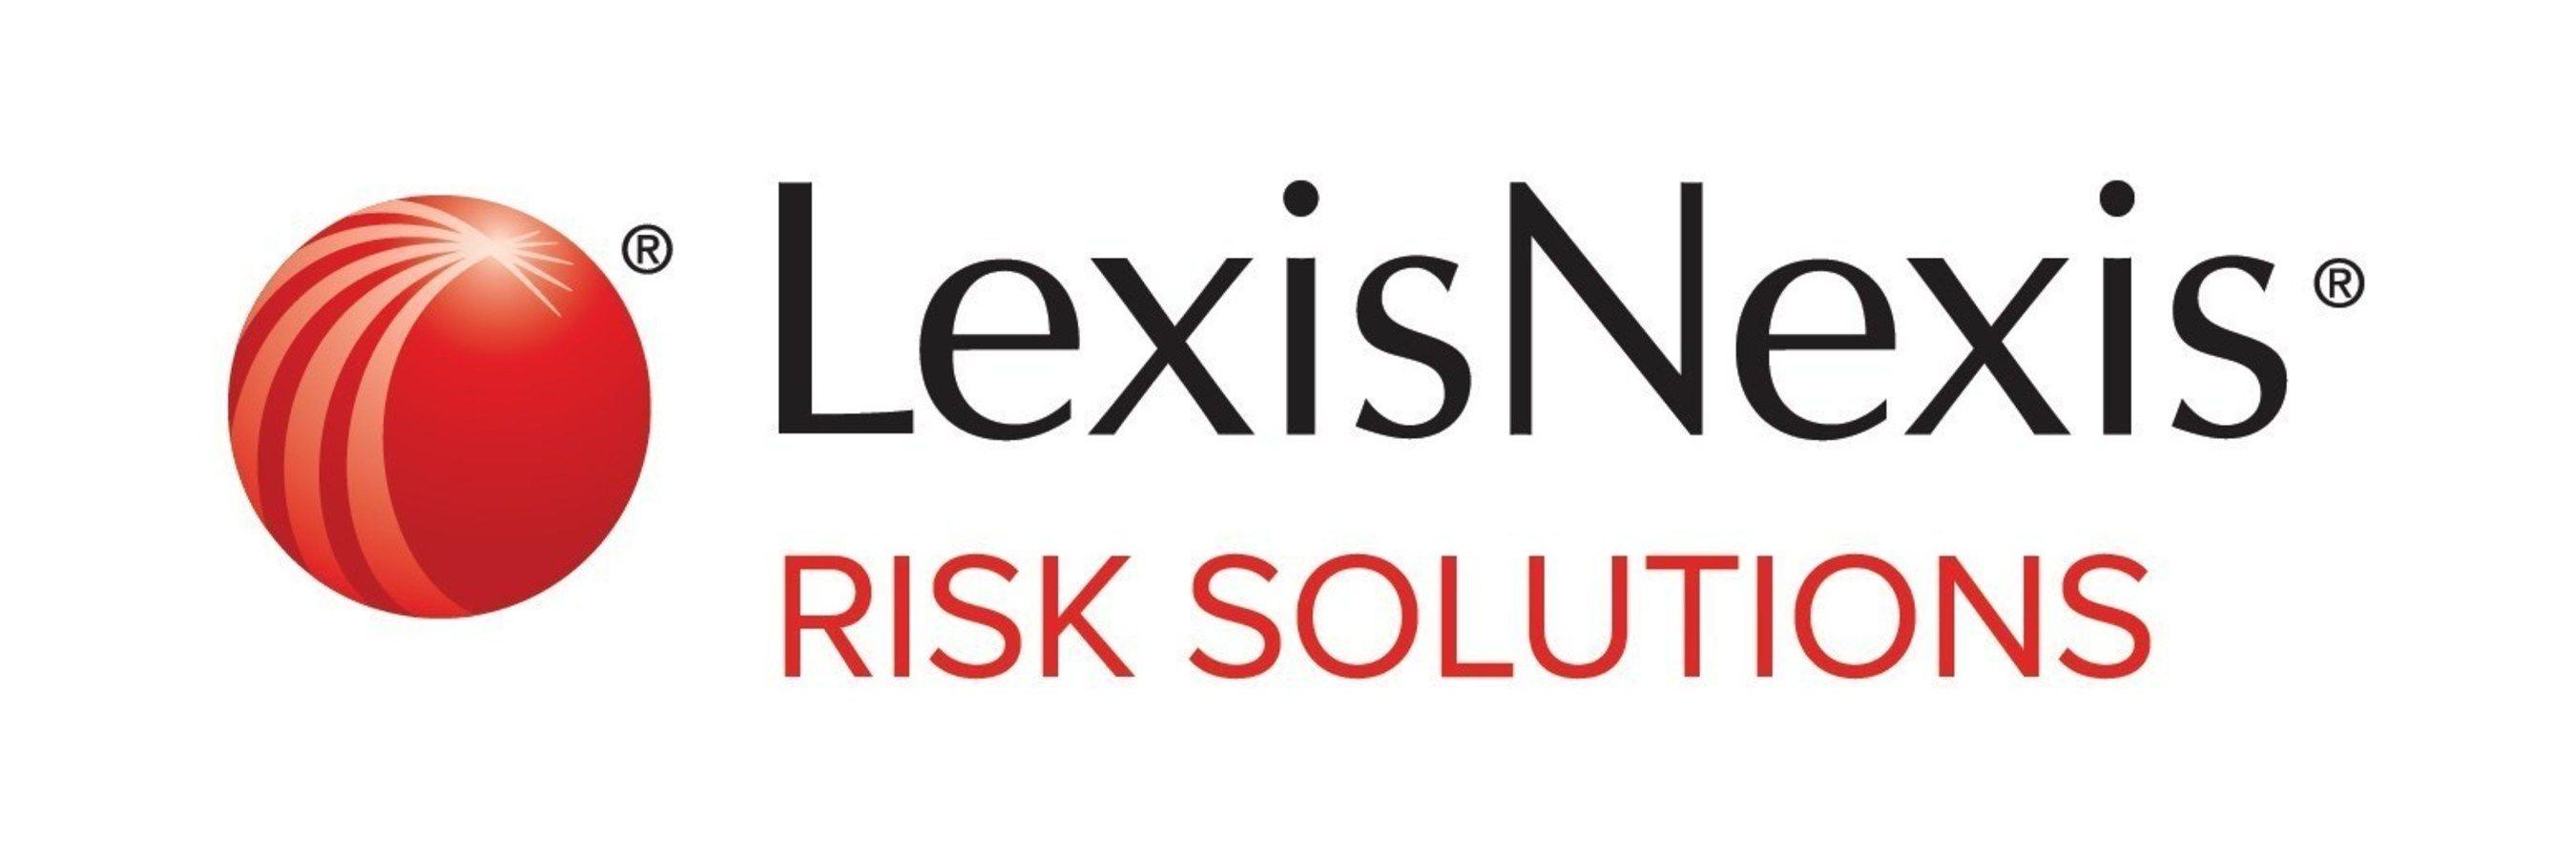 Appriss Logo - LexisNexis Risk Solutions to Acquire Crash and Project business ...